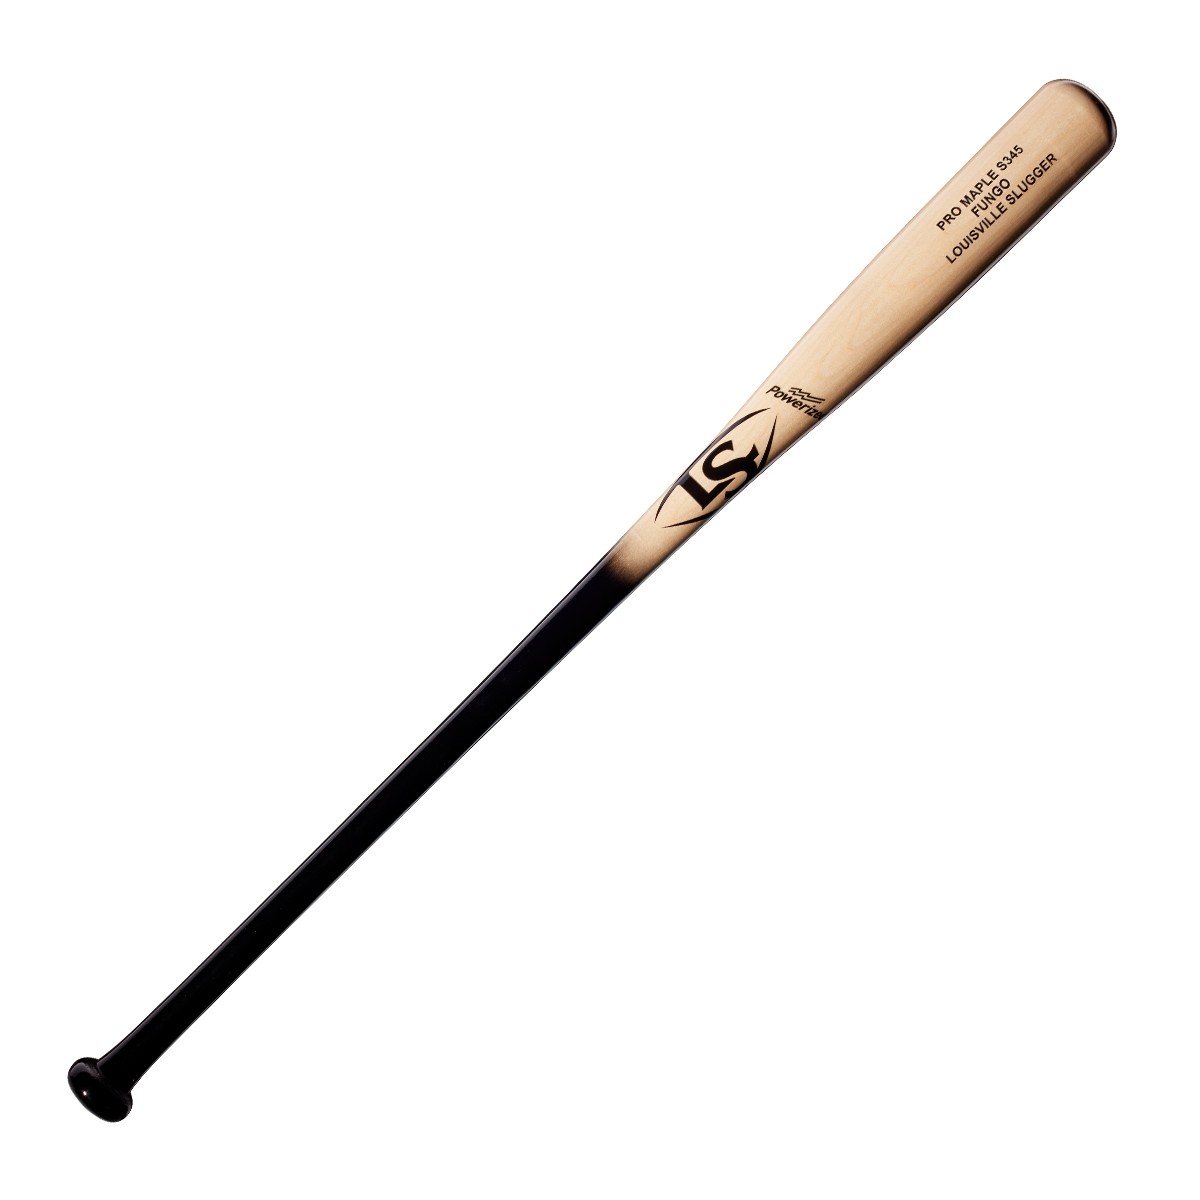 Louisville Slugger's NEW Maple fungo bats are ideal for coaches who hit a lot of fly balls and ground balls for their team. Their end-weight design and lighter weight mean you get more distance and speed with a lighter swing.